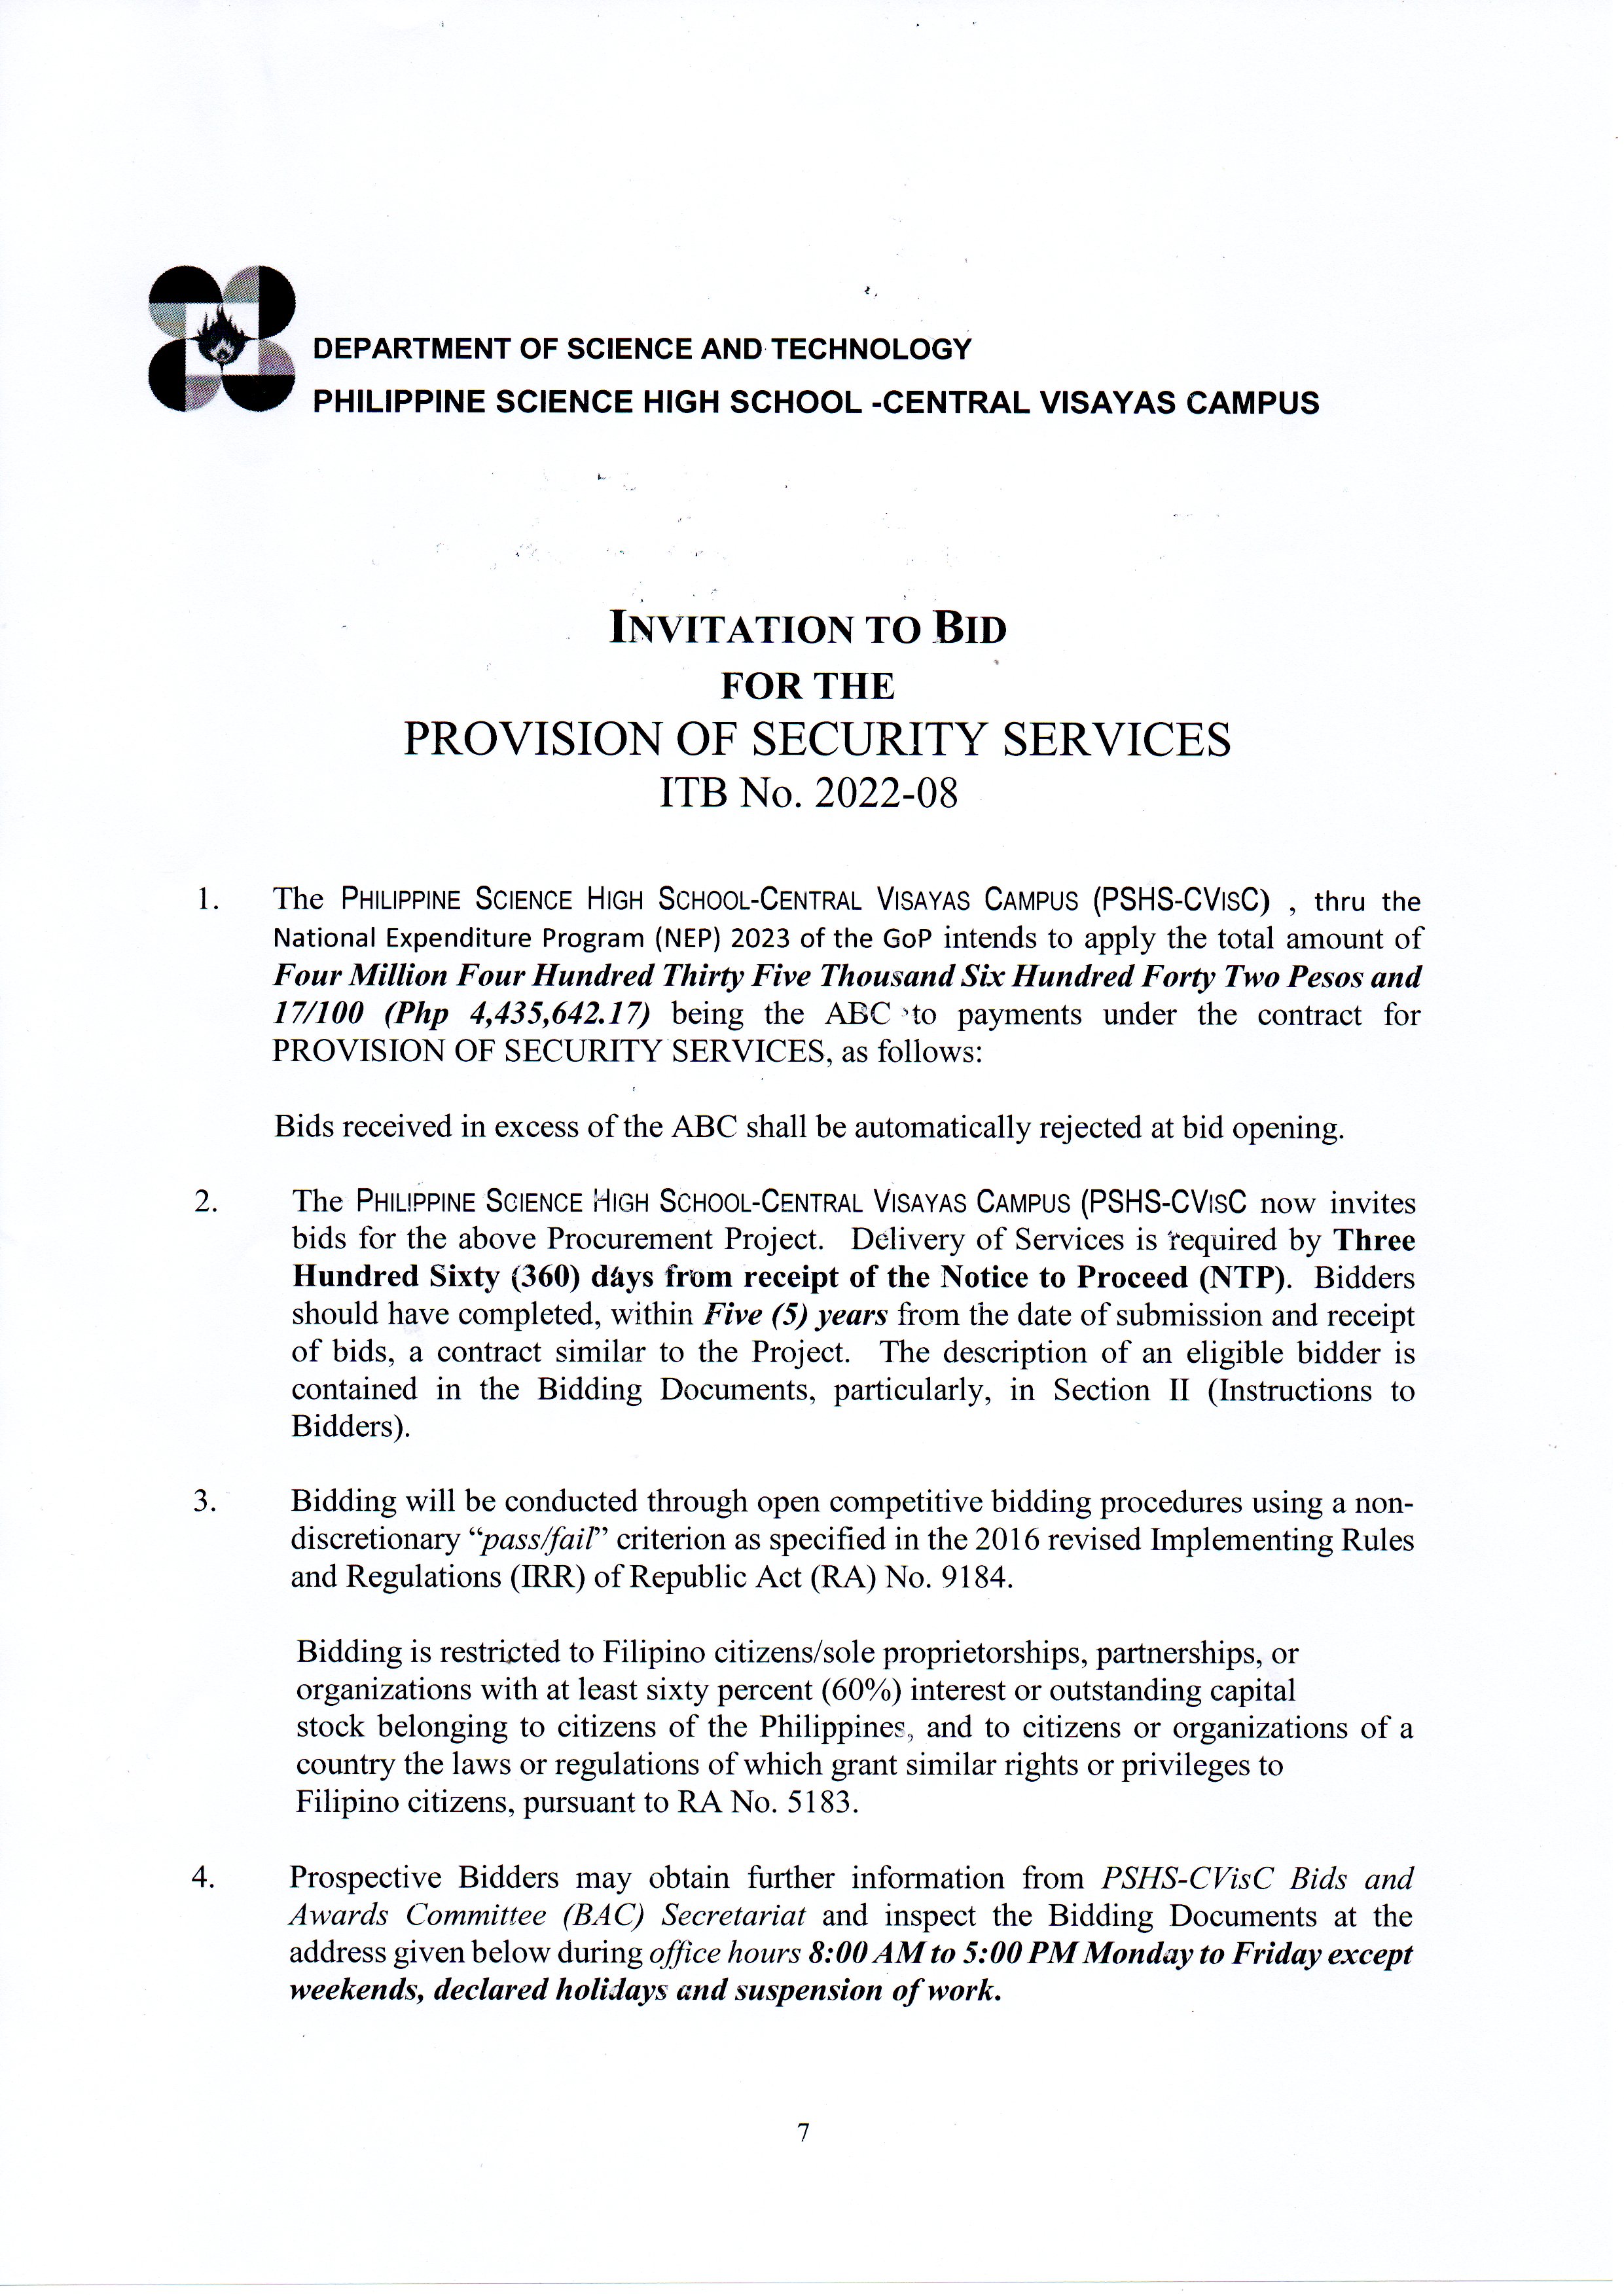 itb provision security services p1of2